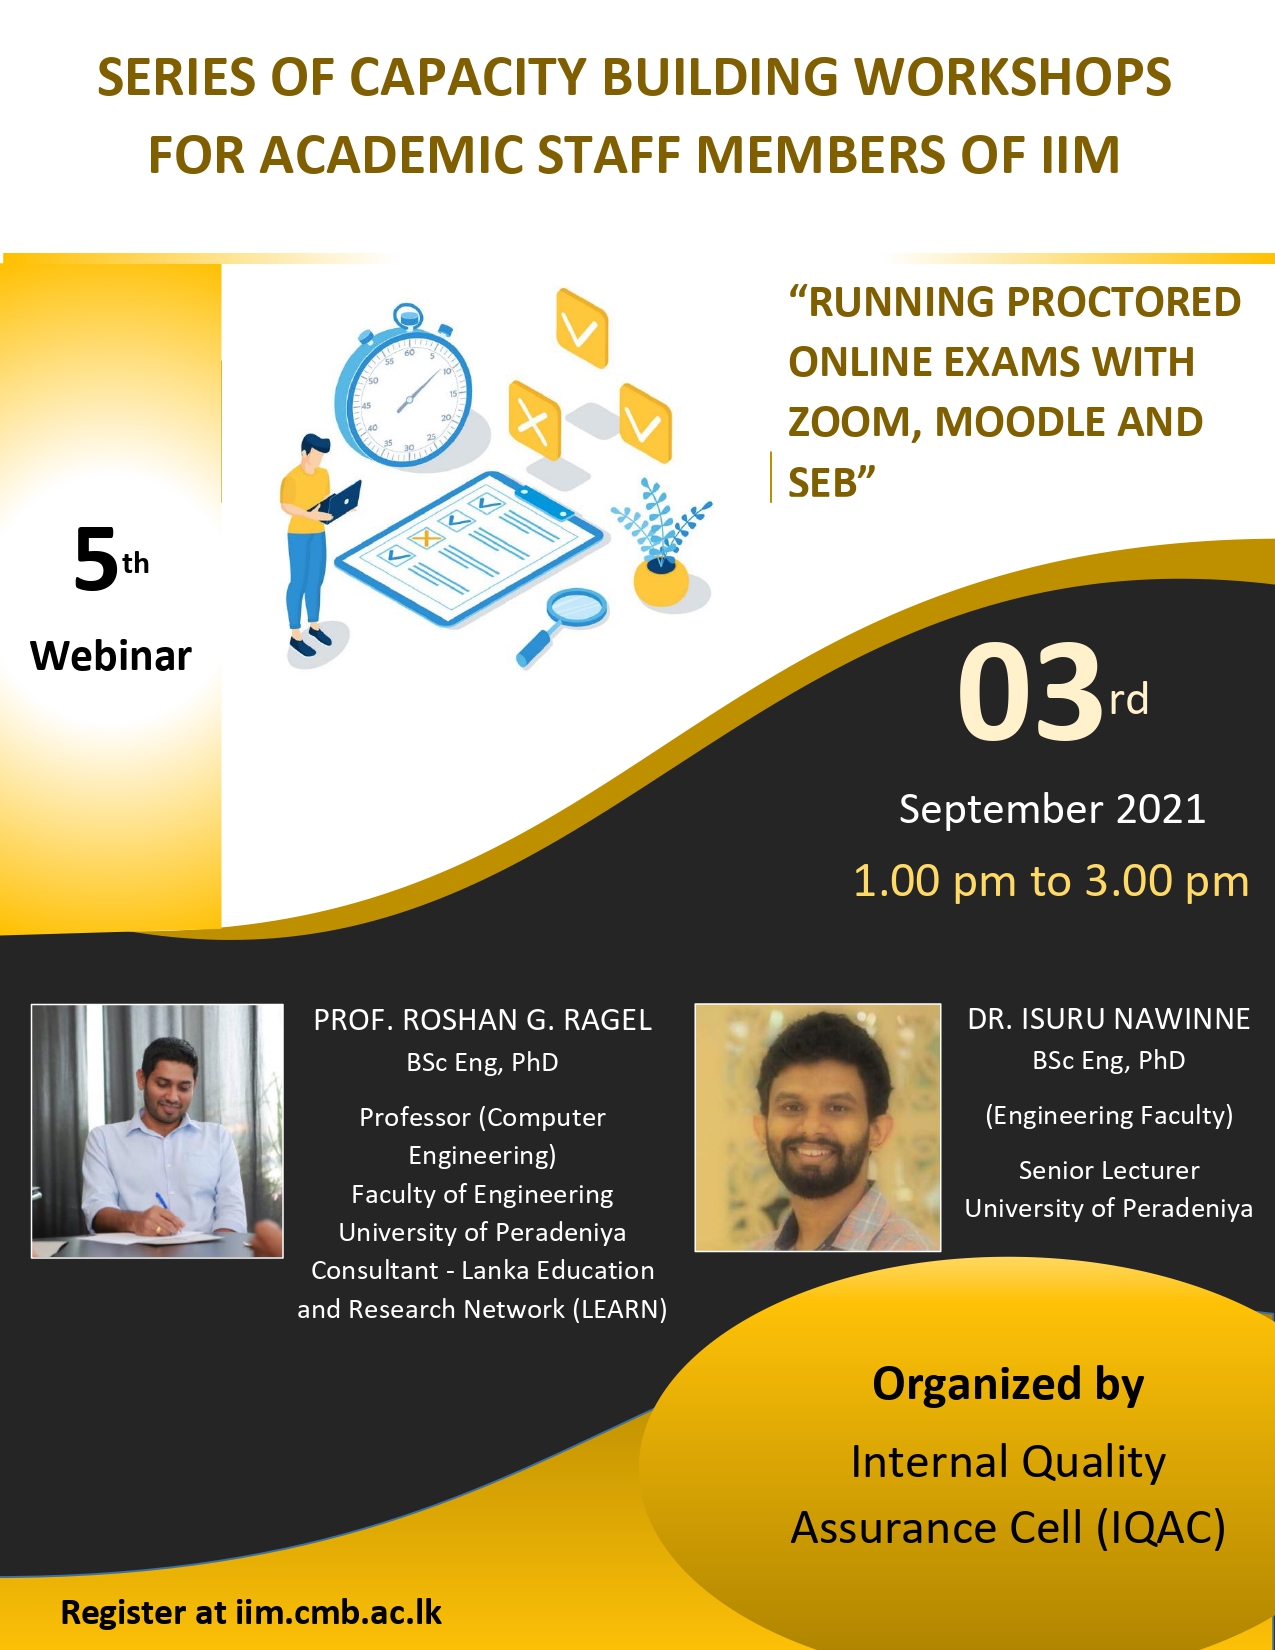 WEBINAR :  “RUNNING PROCTORED ONLINE EXAMS WITH ZOOM, MOODLE AND SEB”